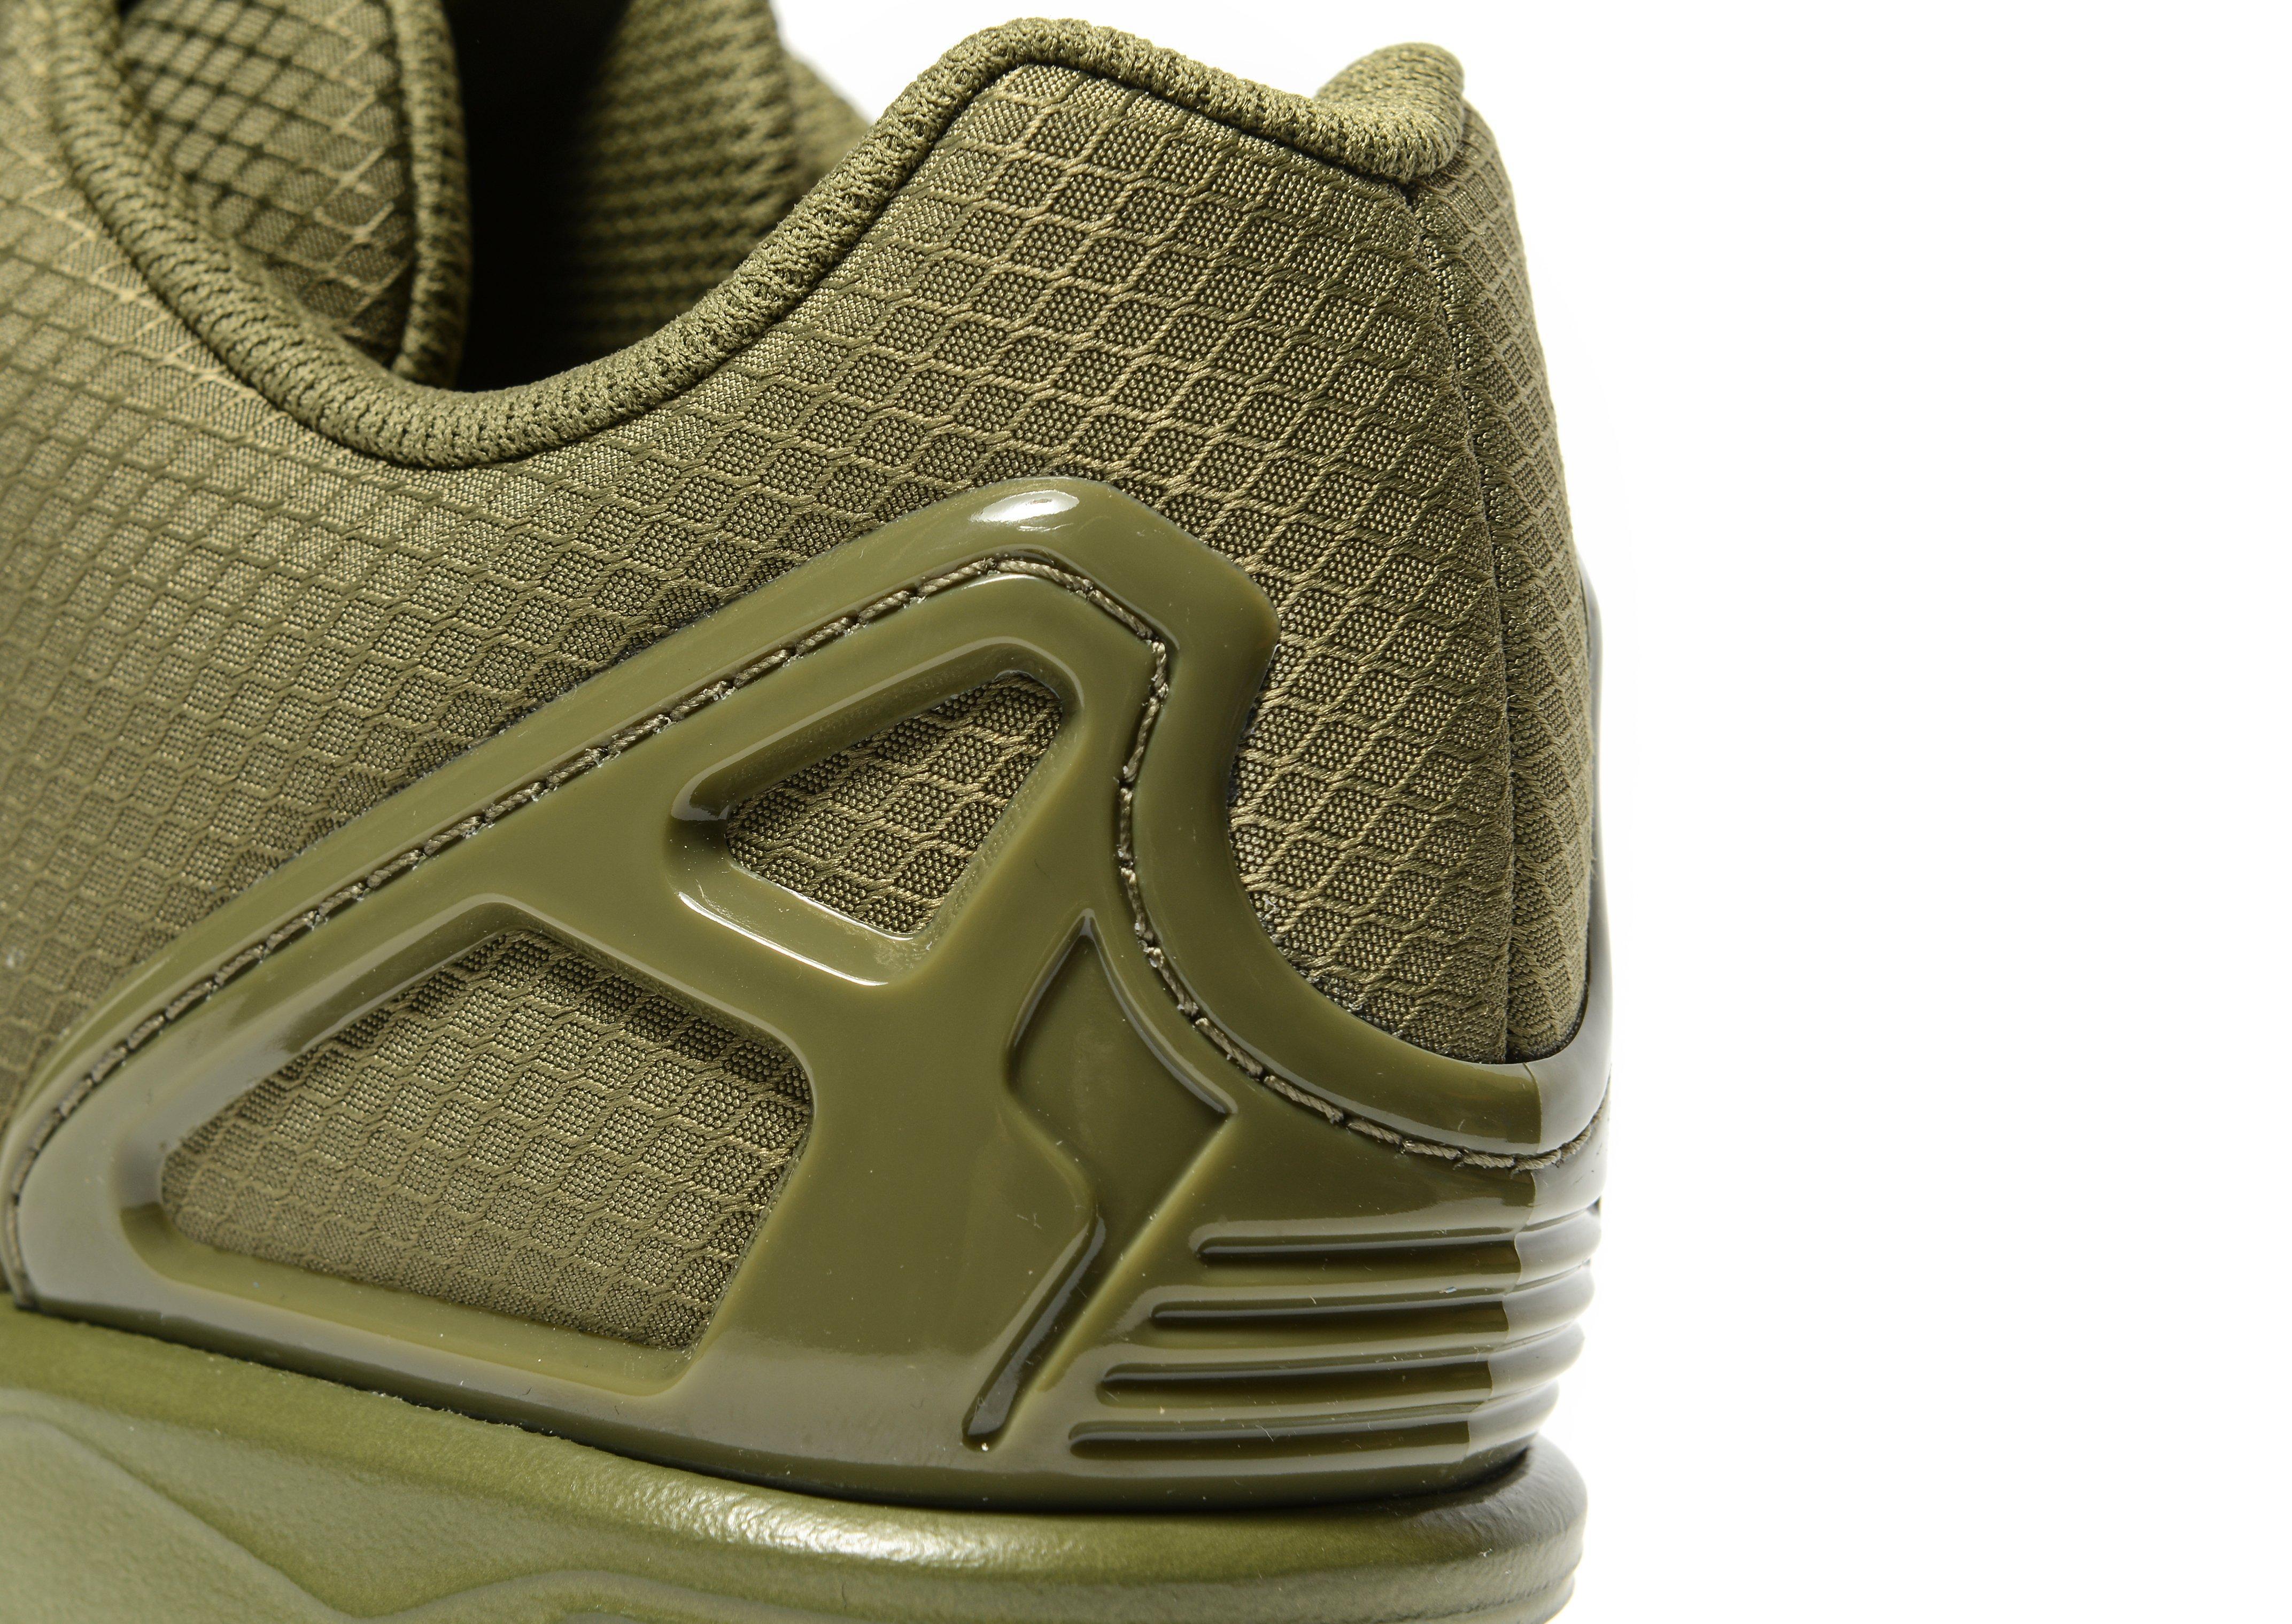 adidas Originals Synthetic Zx Flux Ripstop in Olive (Green) for Men - Lyst